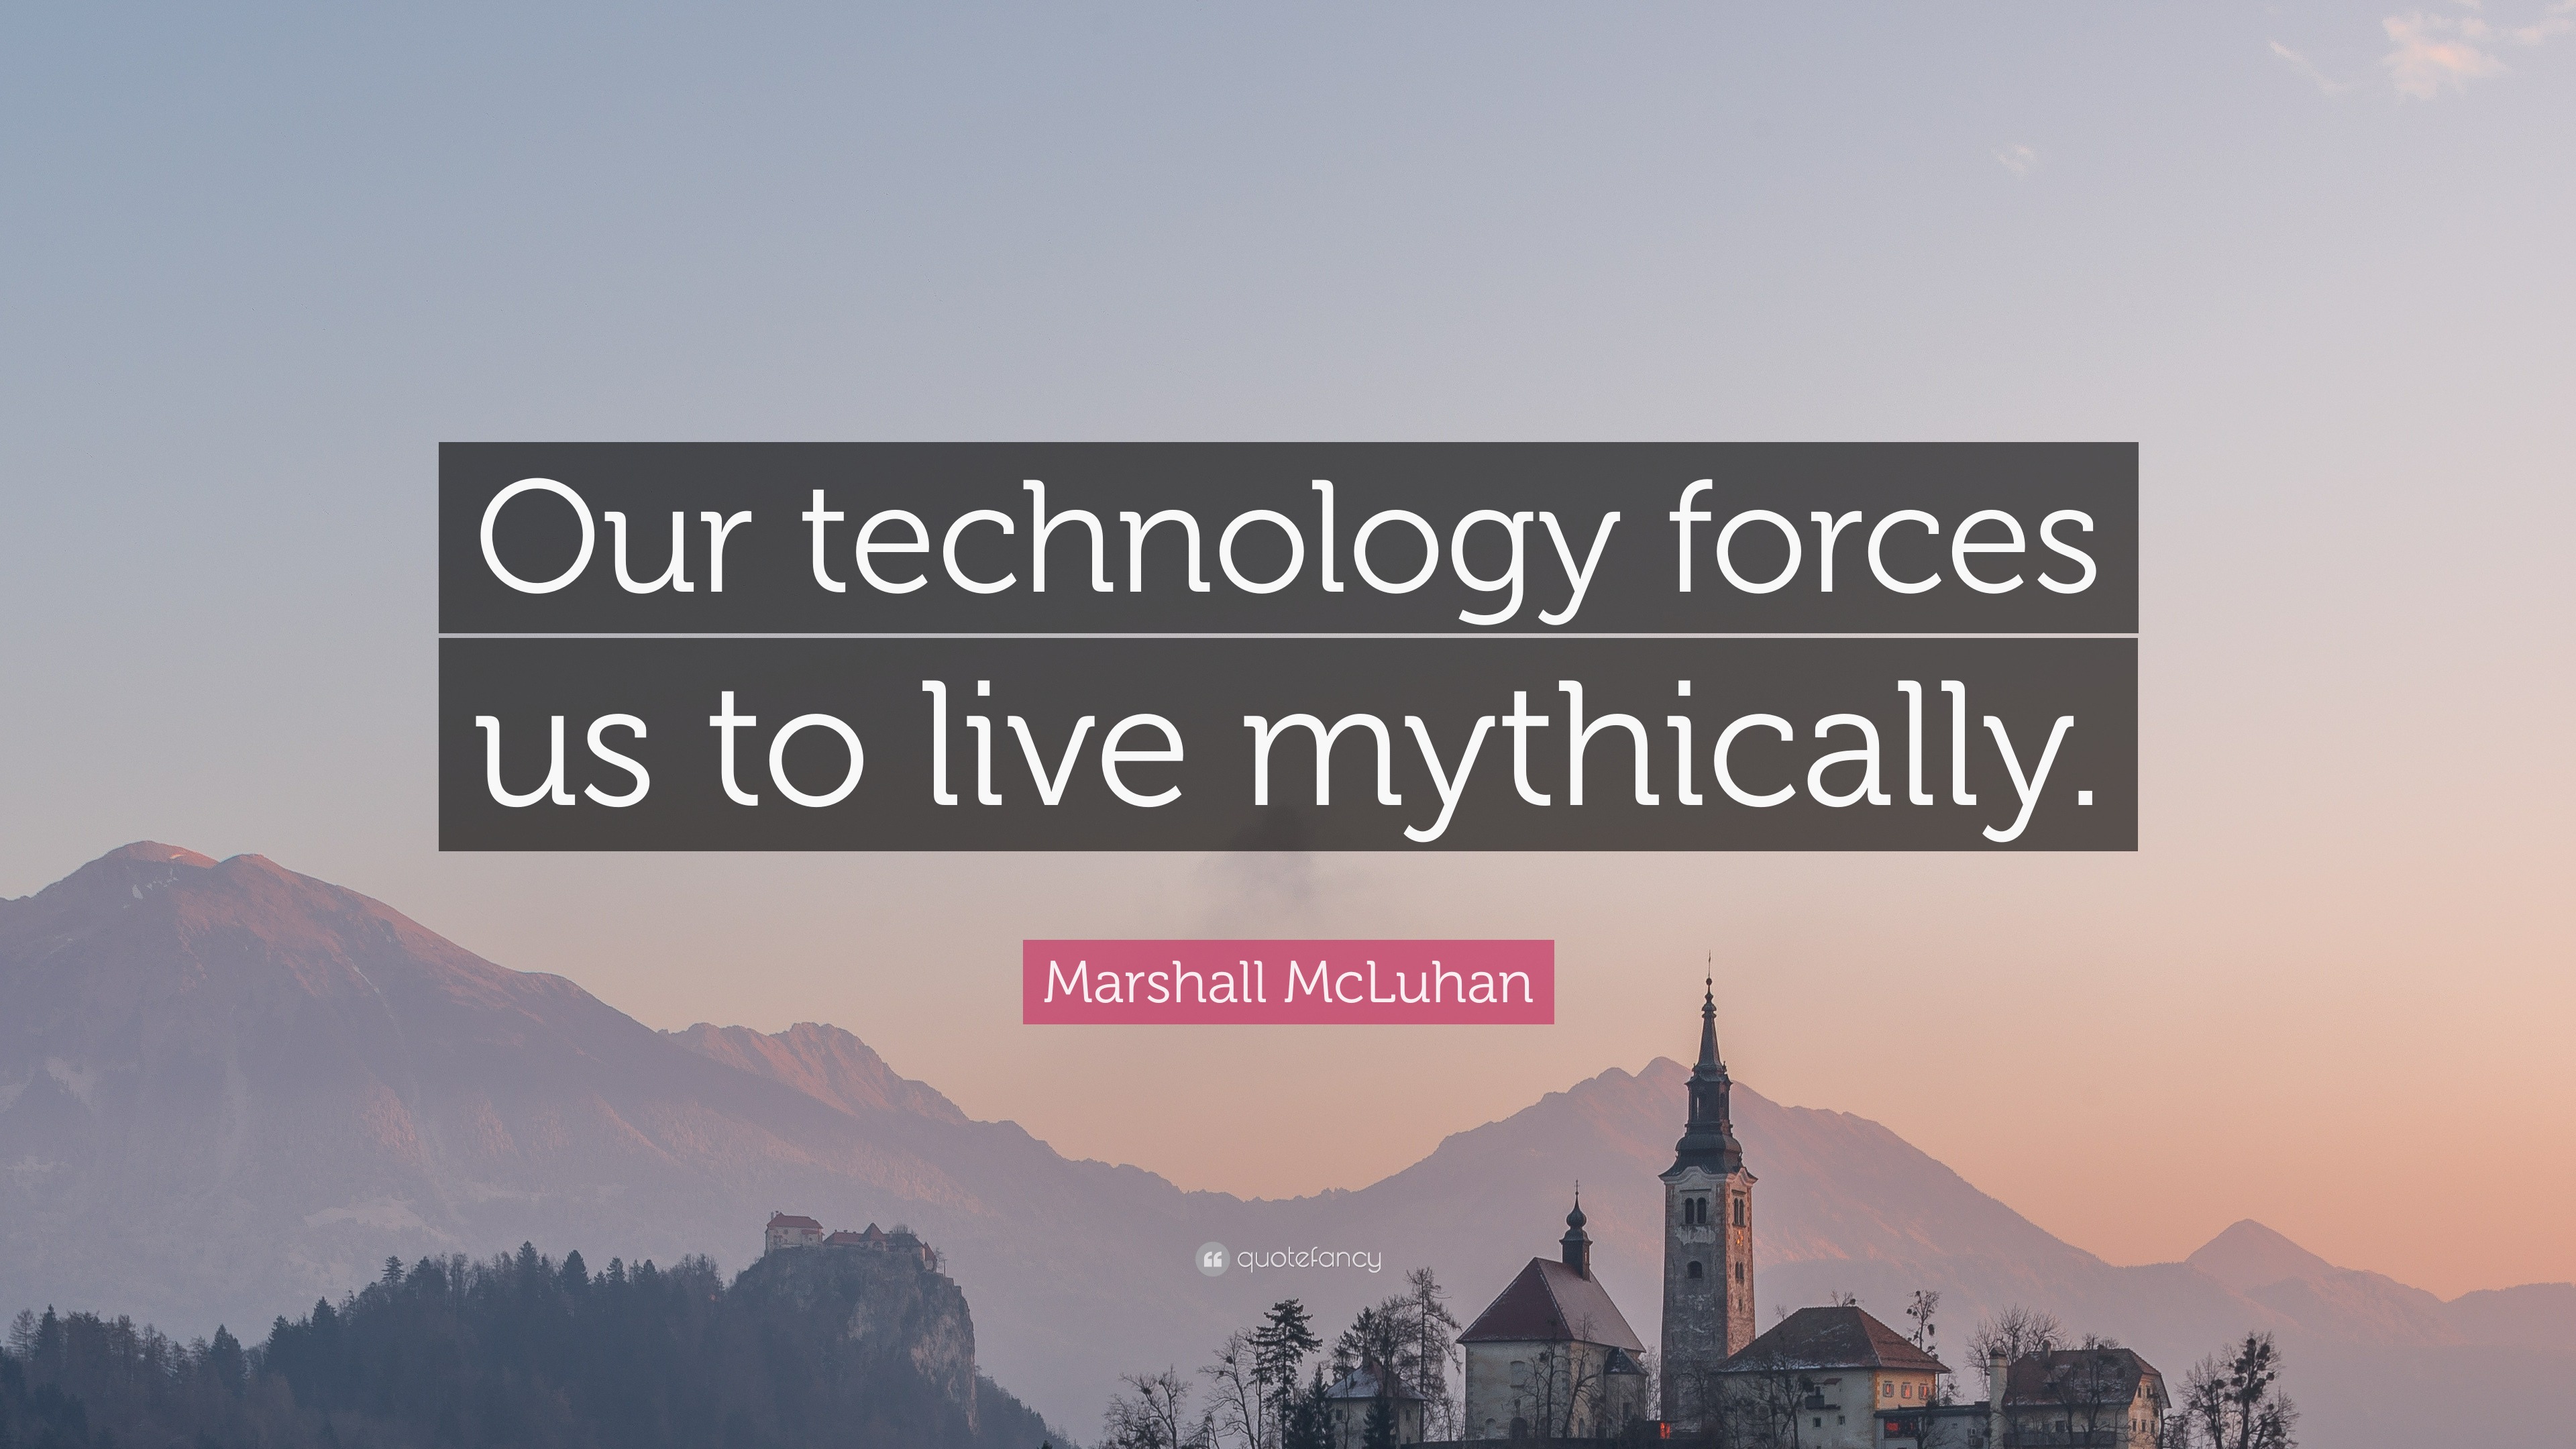 Marshall McLuhan Quote: “Our technology forces us to live mythically.”